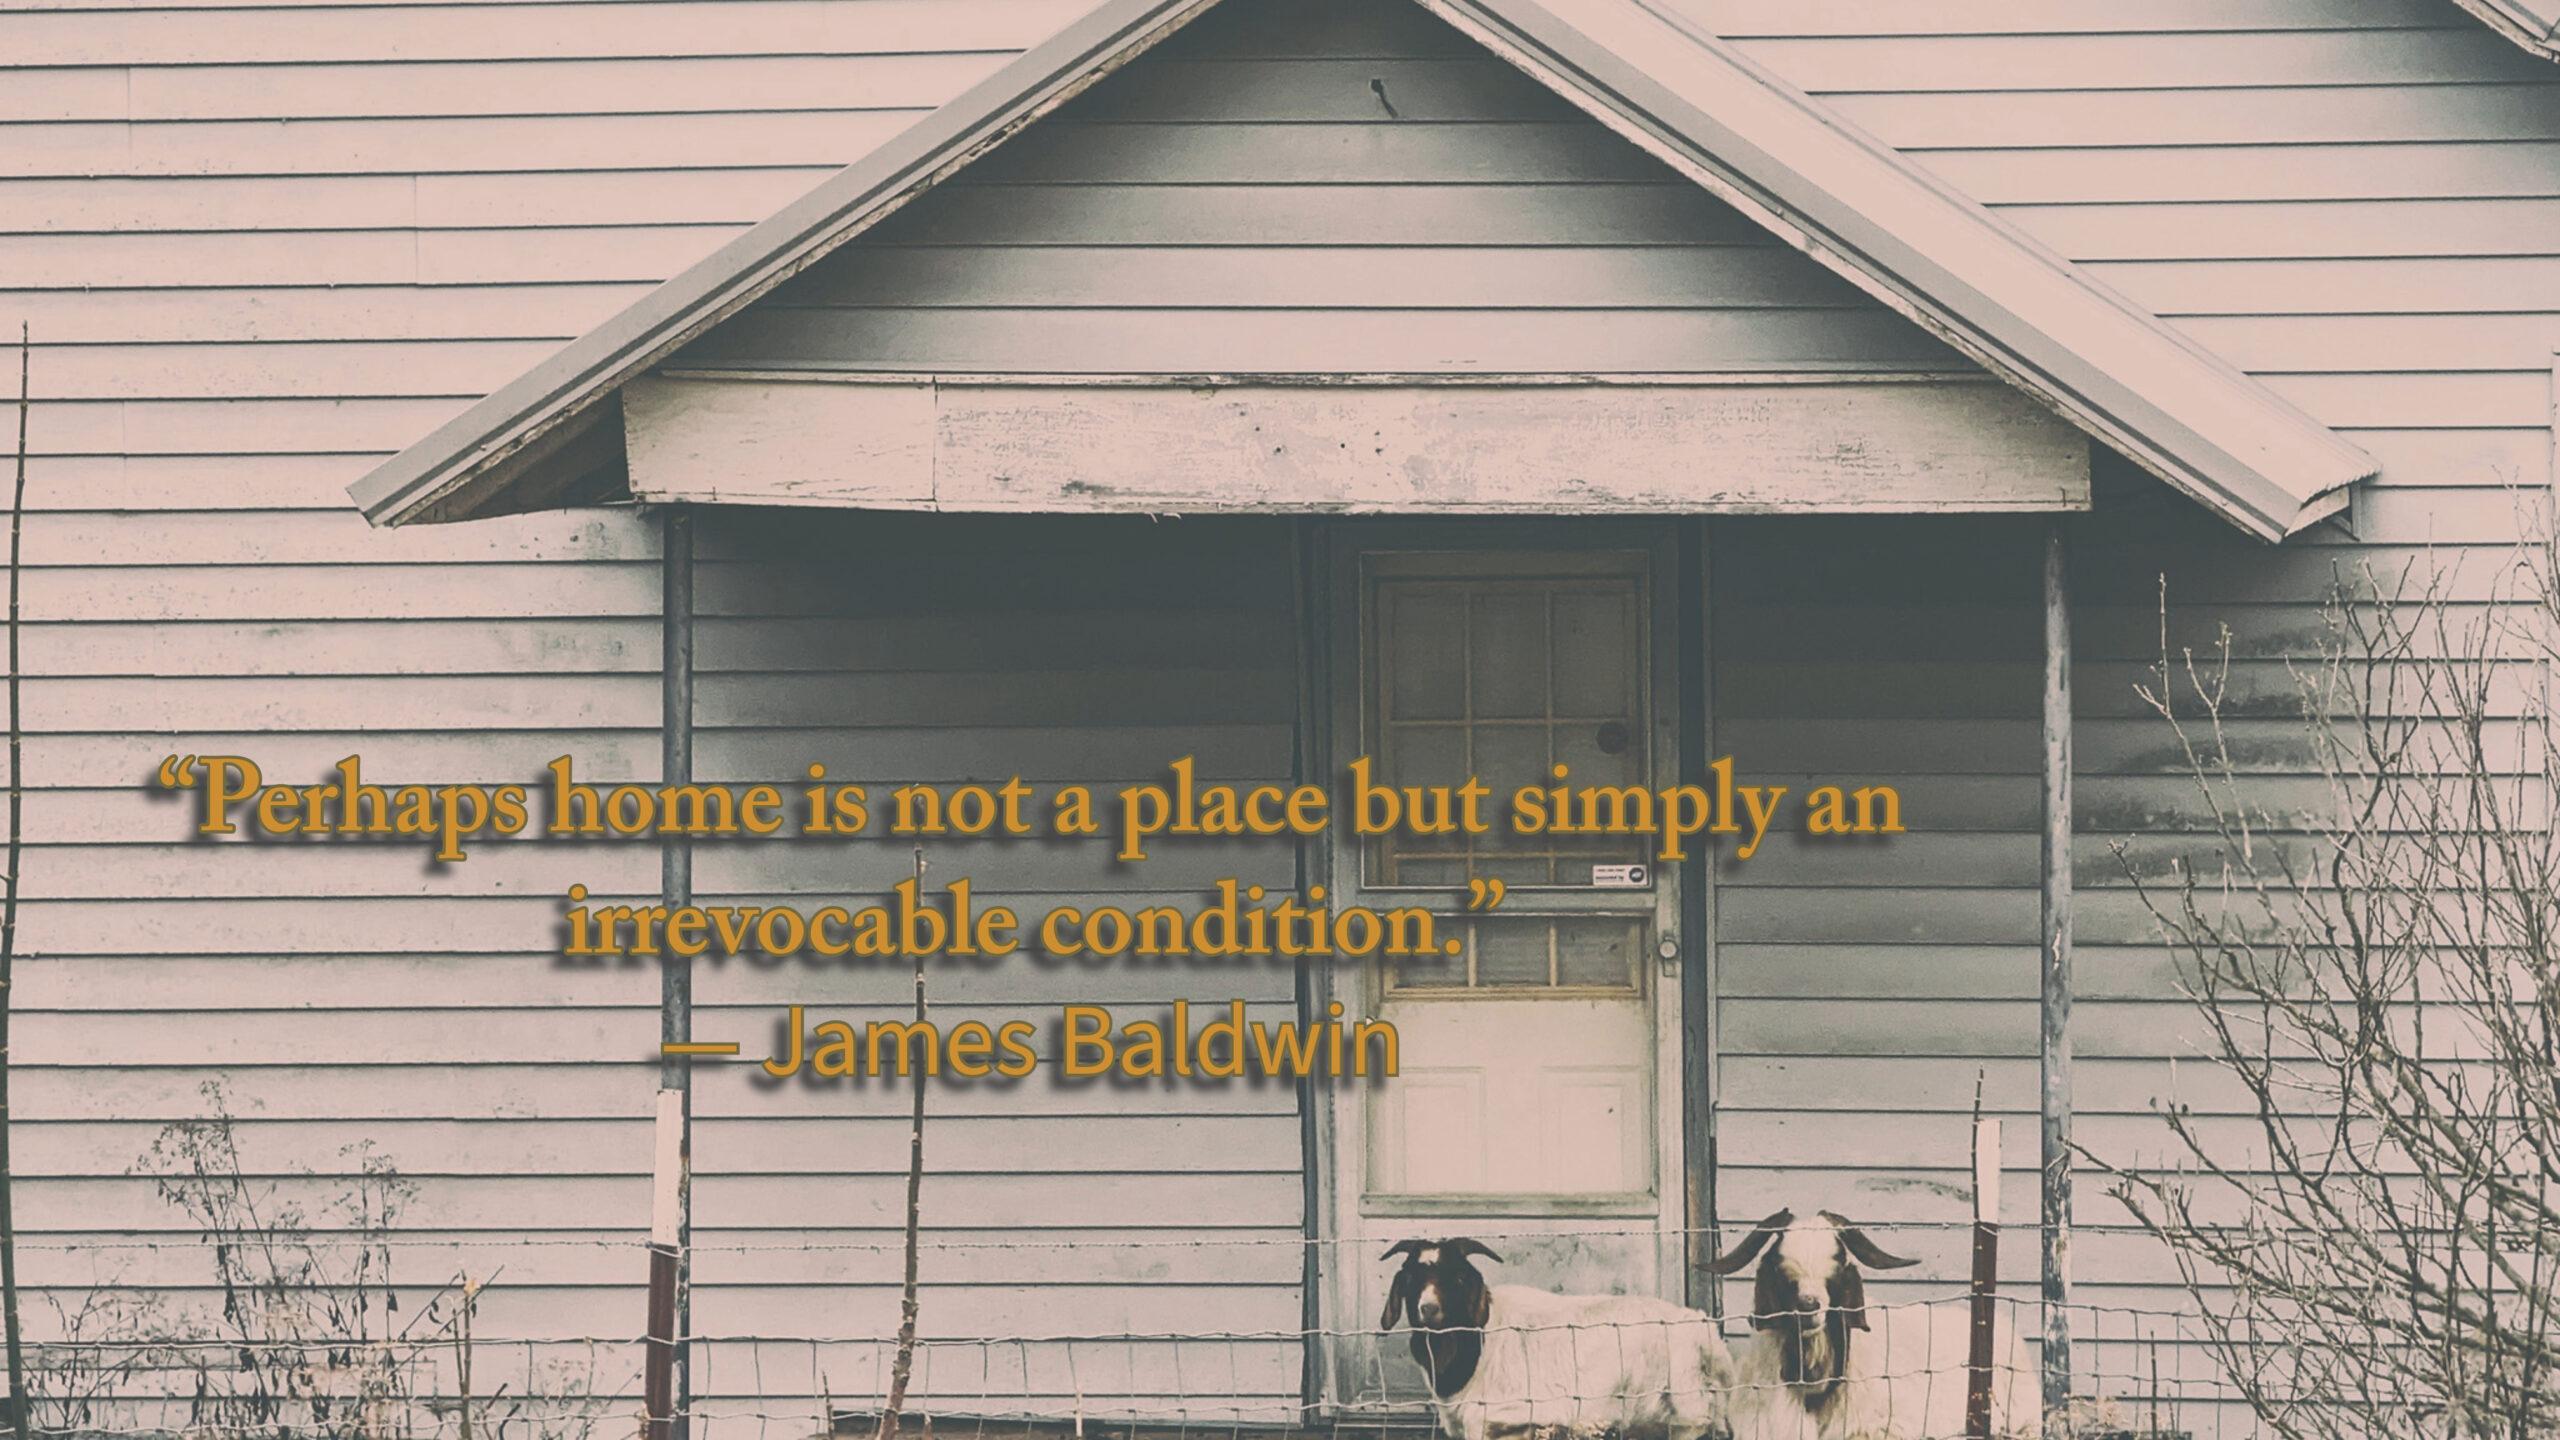 Two goats resting on the front porch of what appears to be an abandoned home, with the words showing: “Perhaps home is not a place but simply an irrevocable condition.” ― James Baldwin